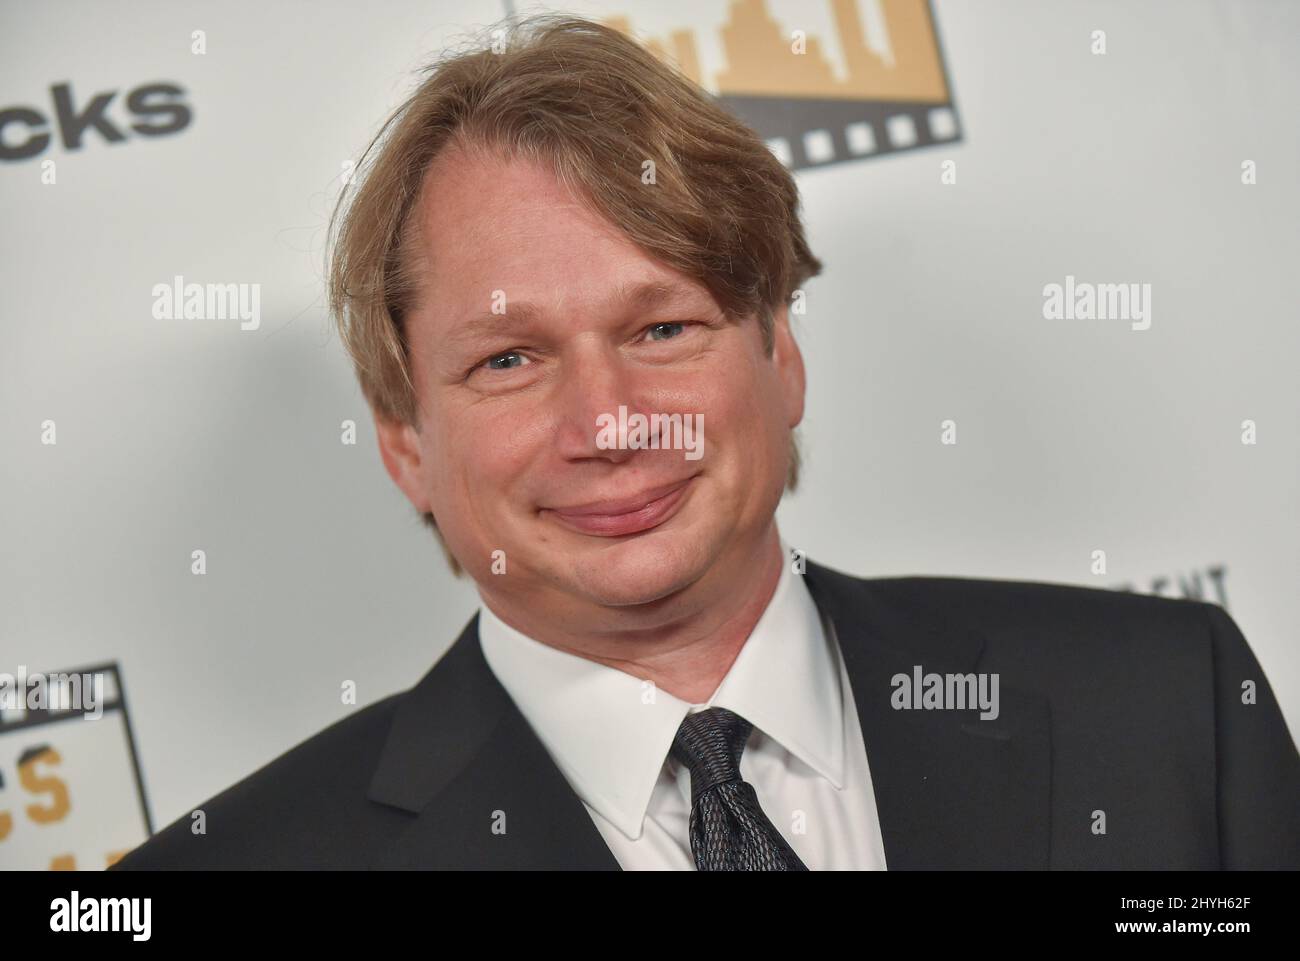 Dan DeLeeuw at the 2nd Annual Los Angeles Online Film Critics Society Awards held at the Taglyan Complex Stock Photo